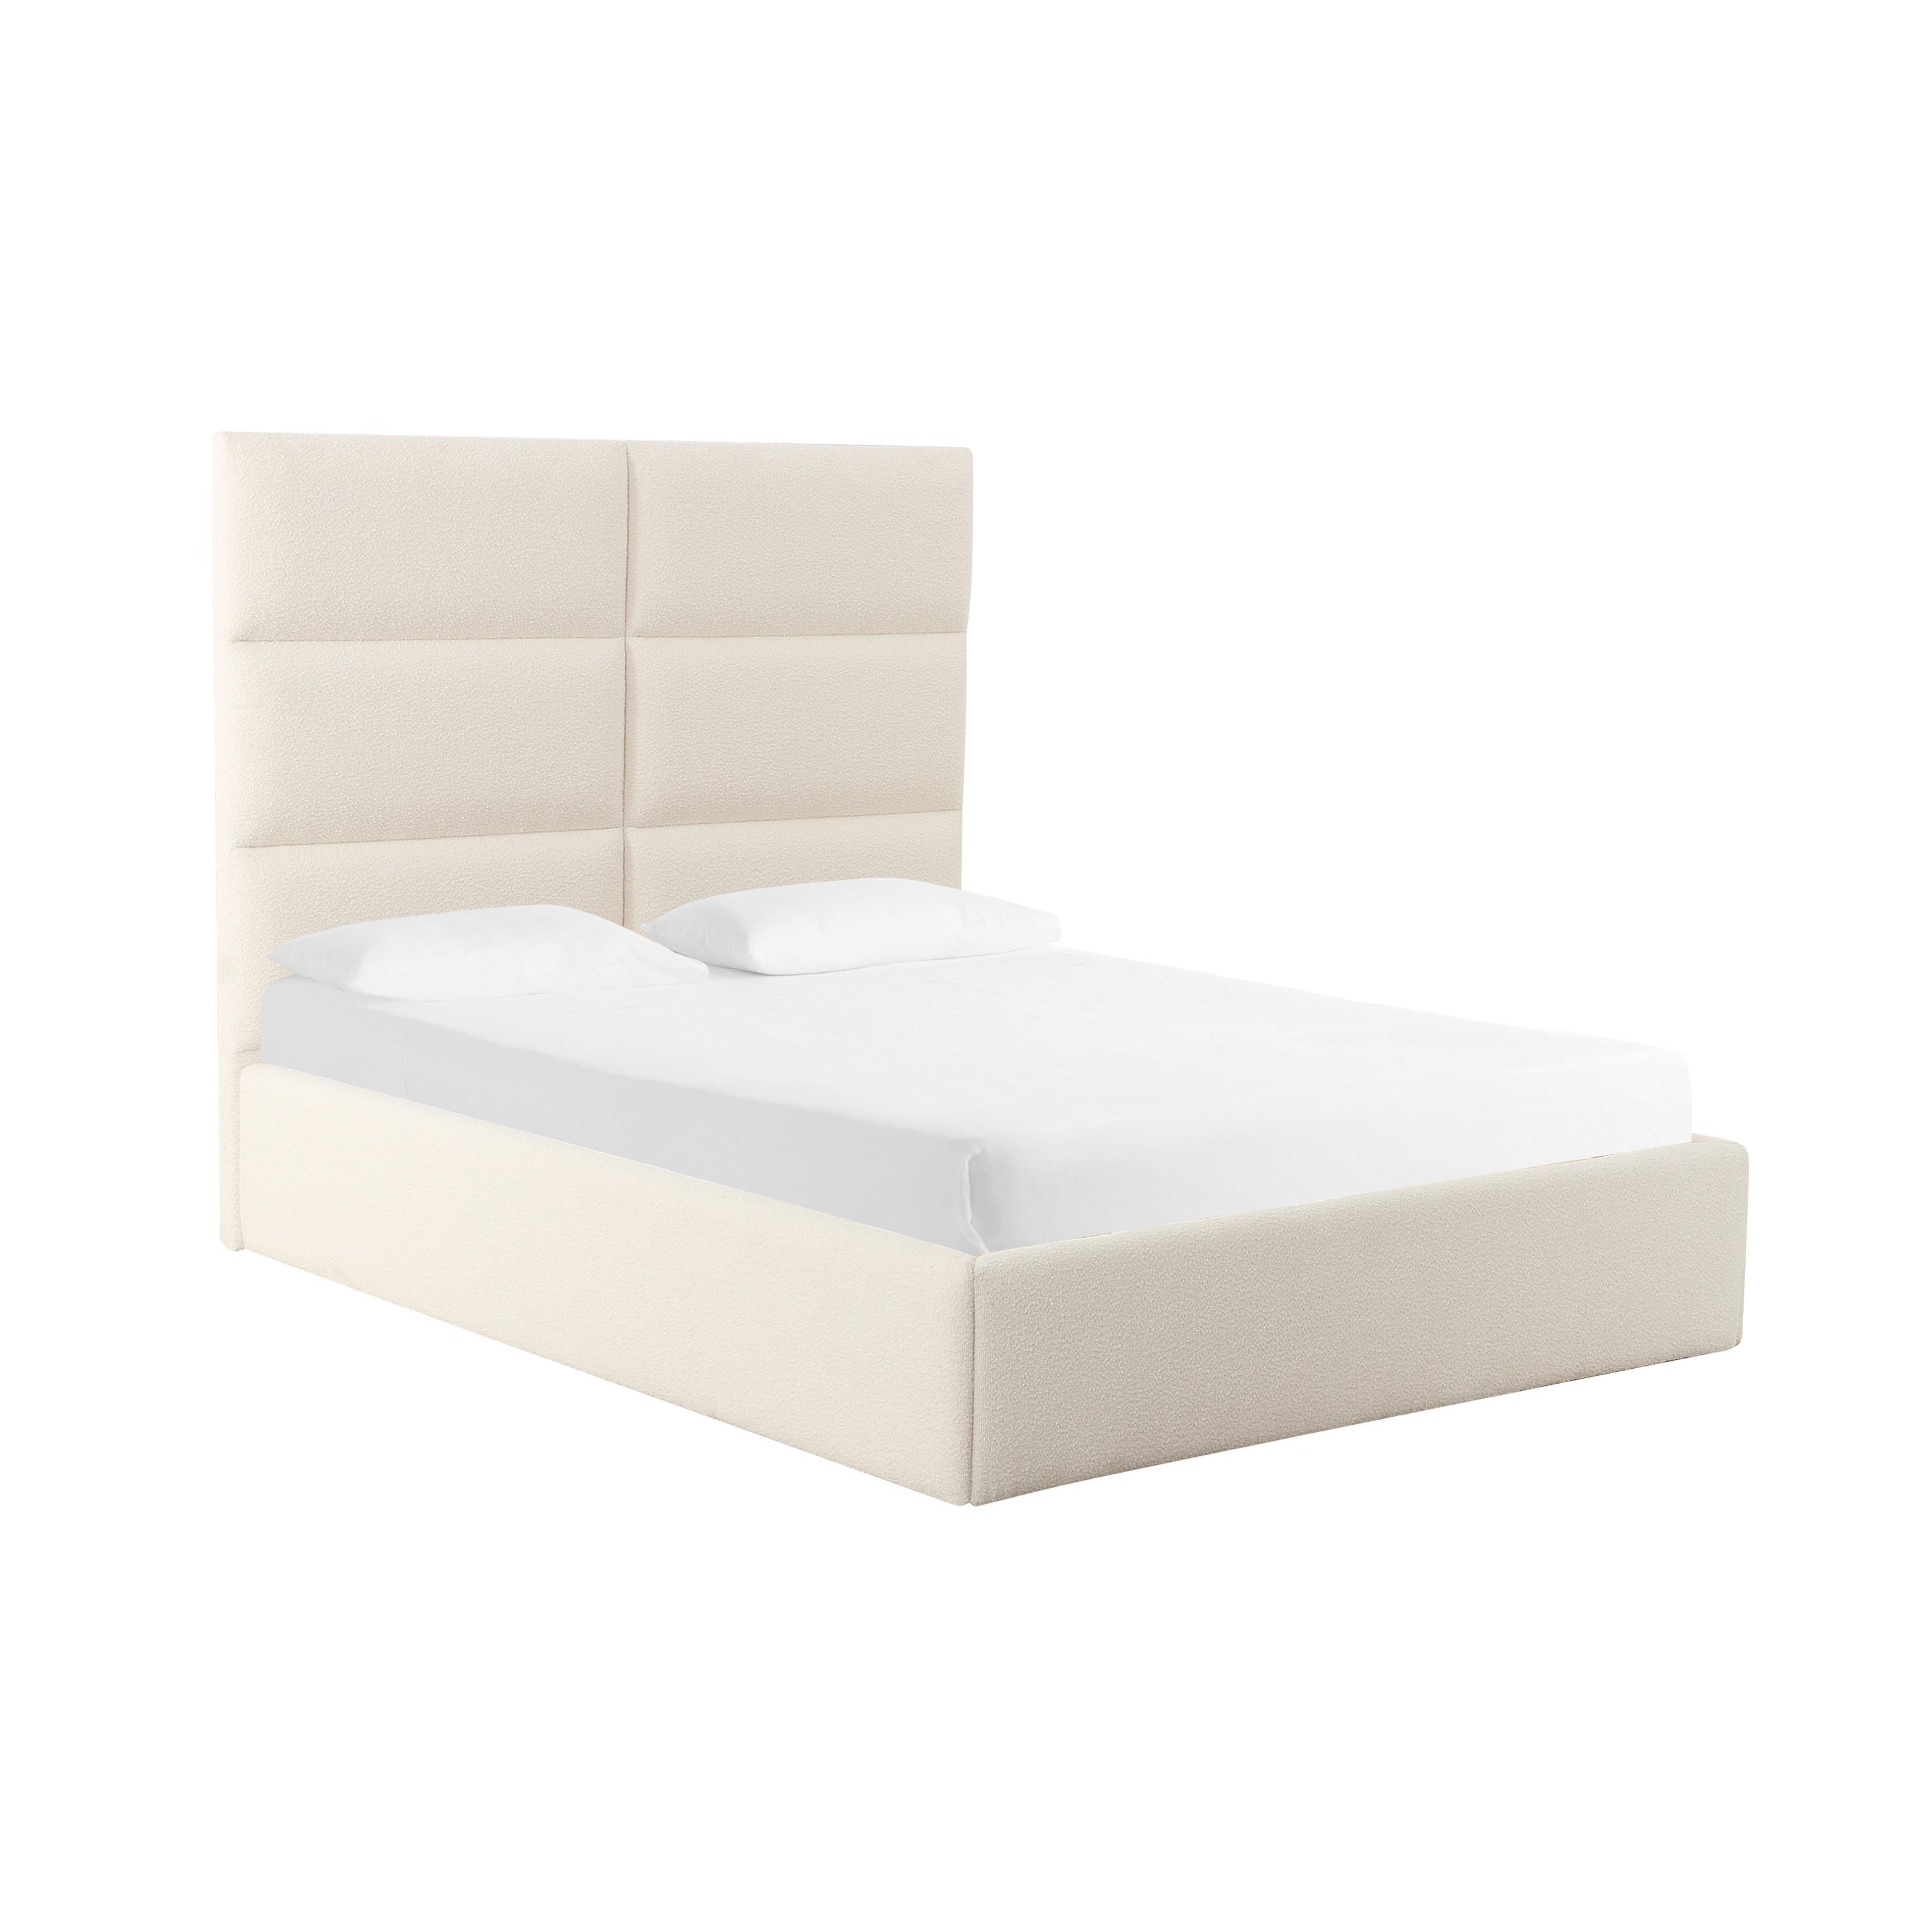 Tov Furniture Beds - Eliana Cream Boucle Queen Bed